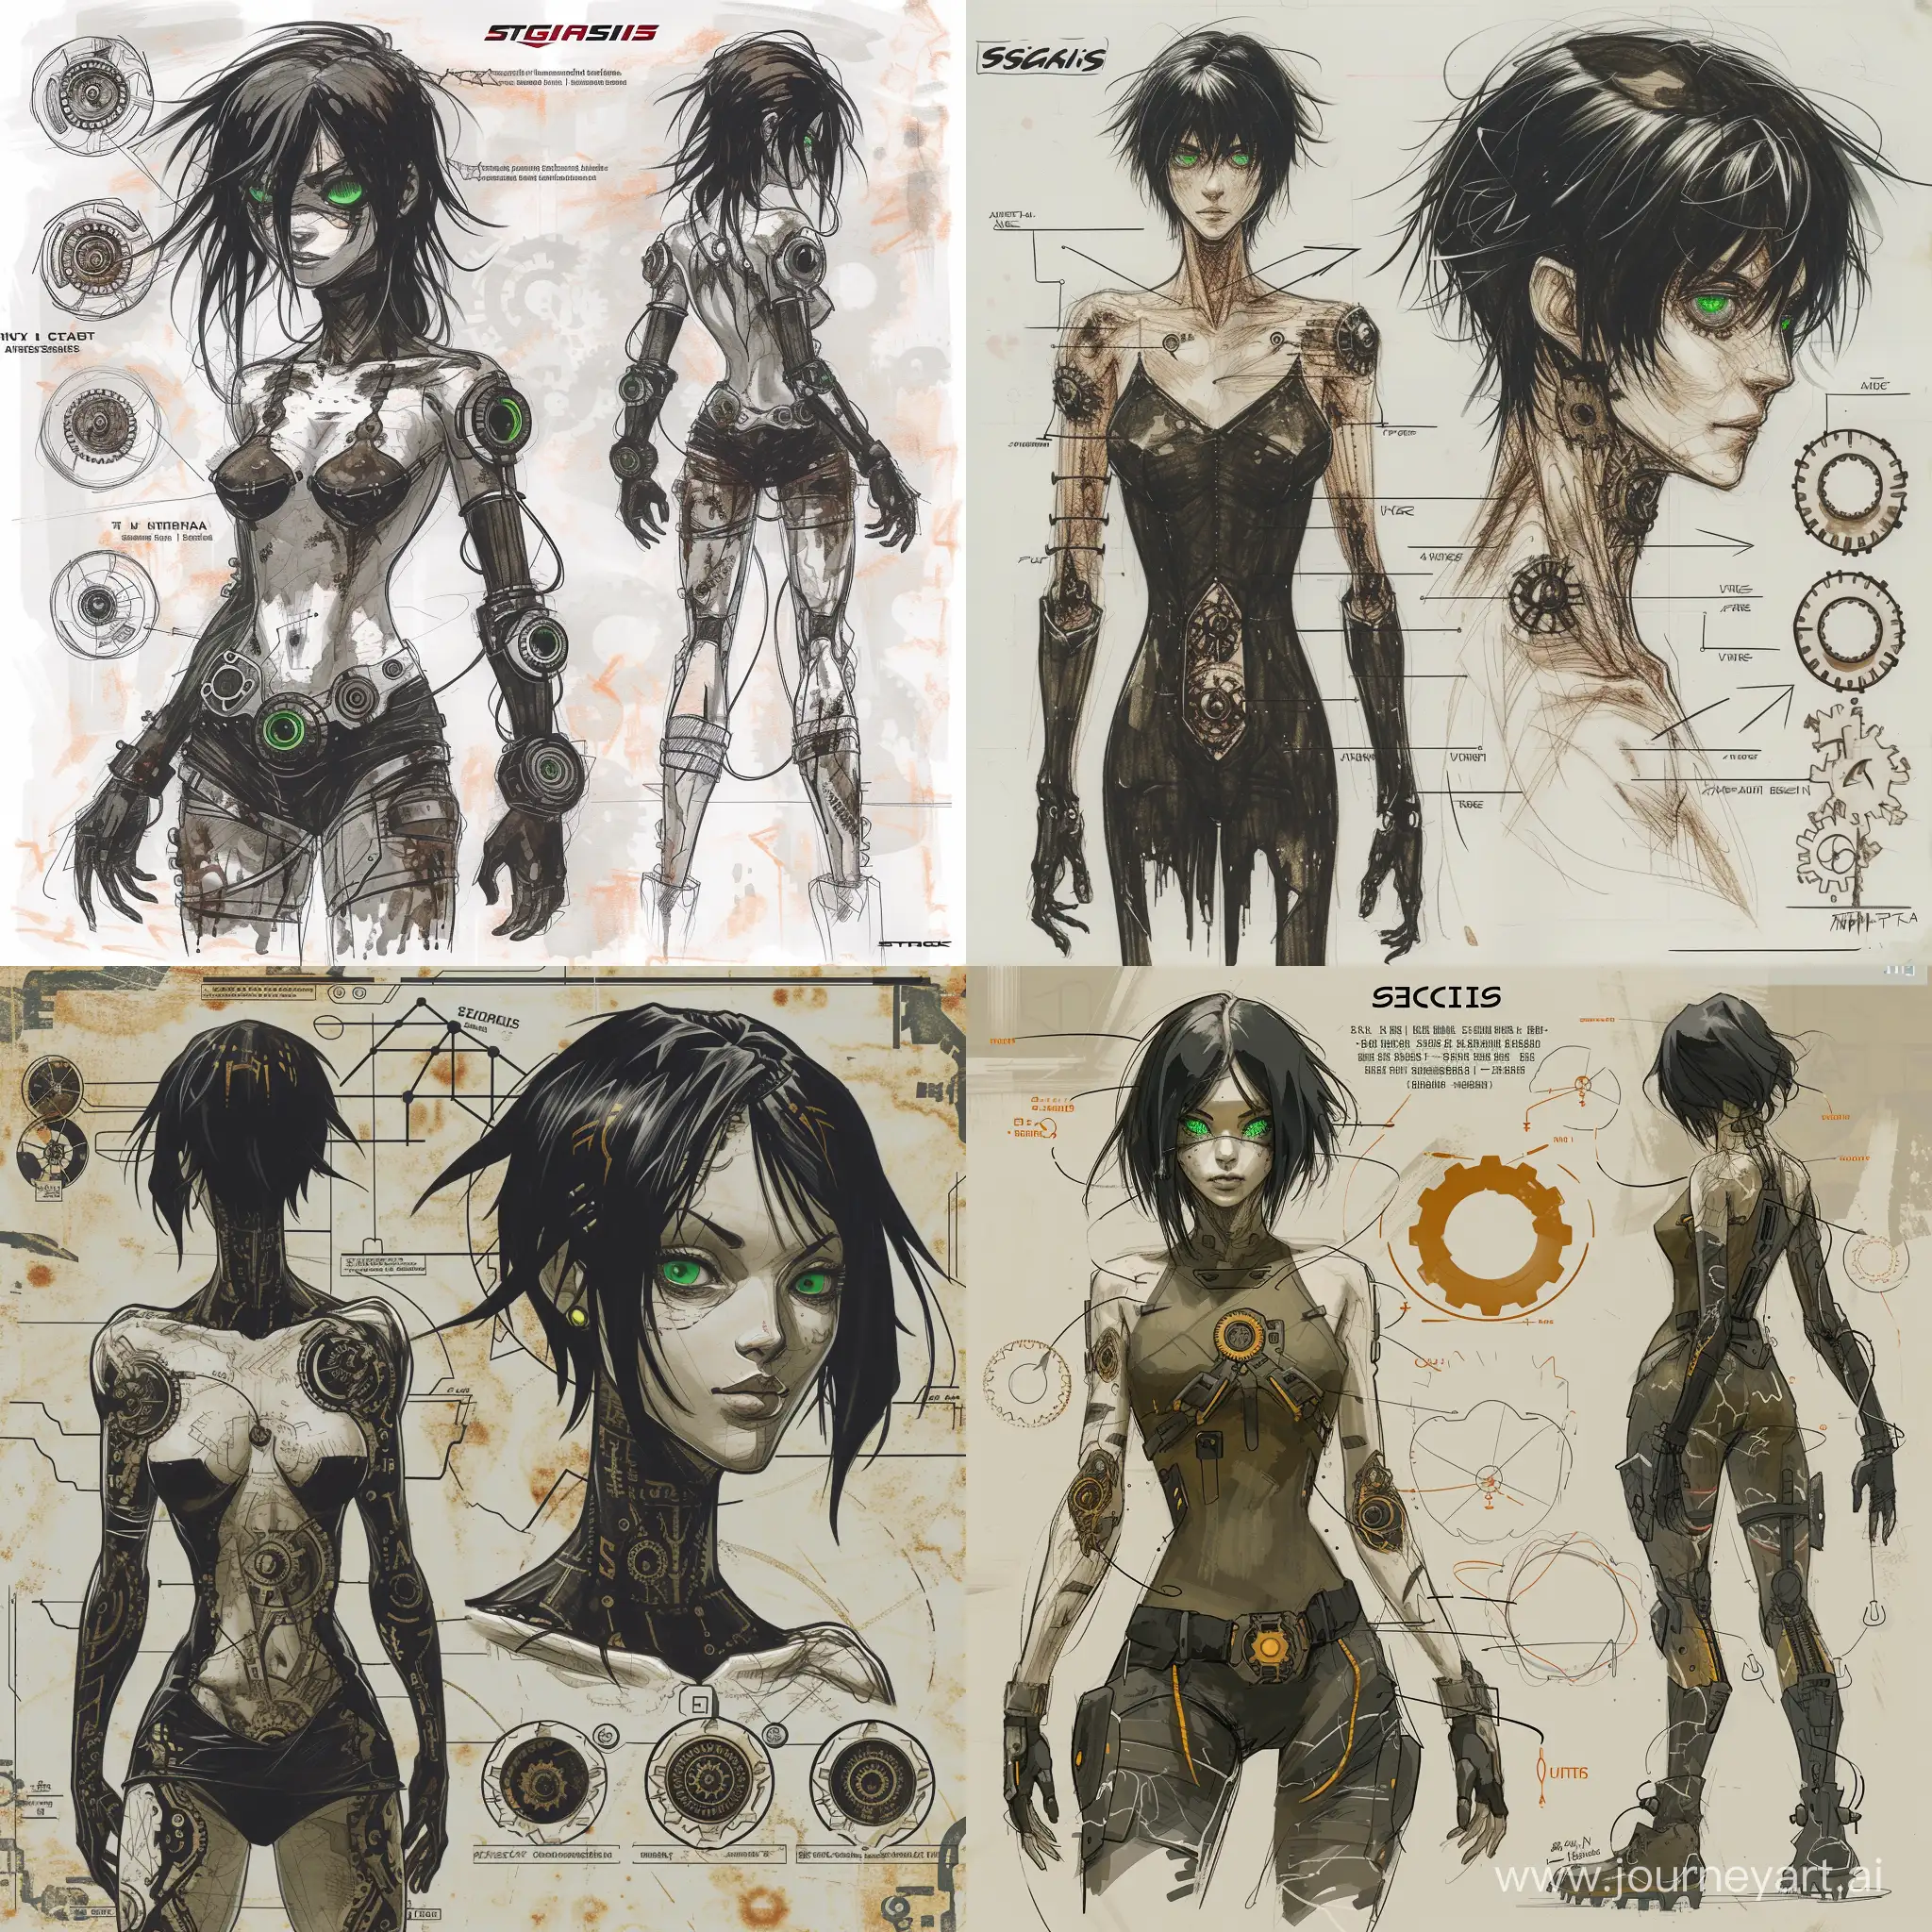 full body character design sheet, underground slum chracter, female, very pale, black hair, green eyes, showing gears, full color pen sketch, style of Signalis video game, style of tsutomu nihei, character concept.